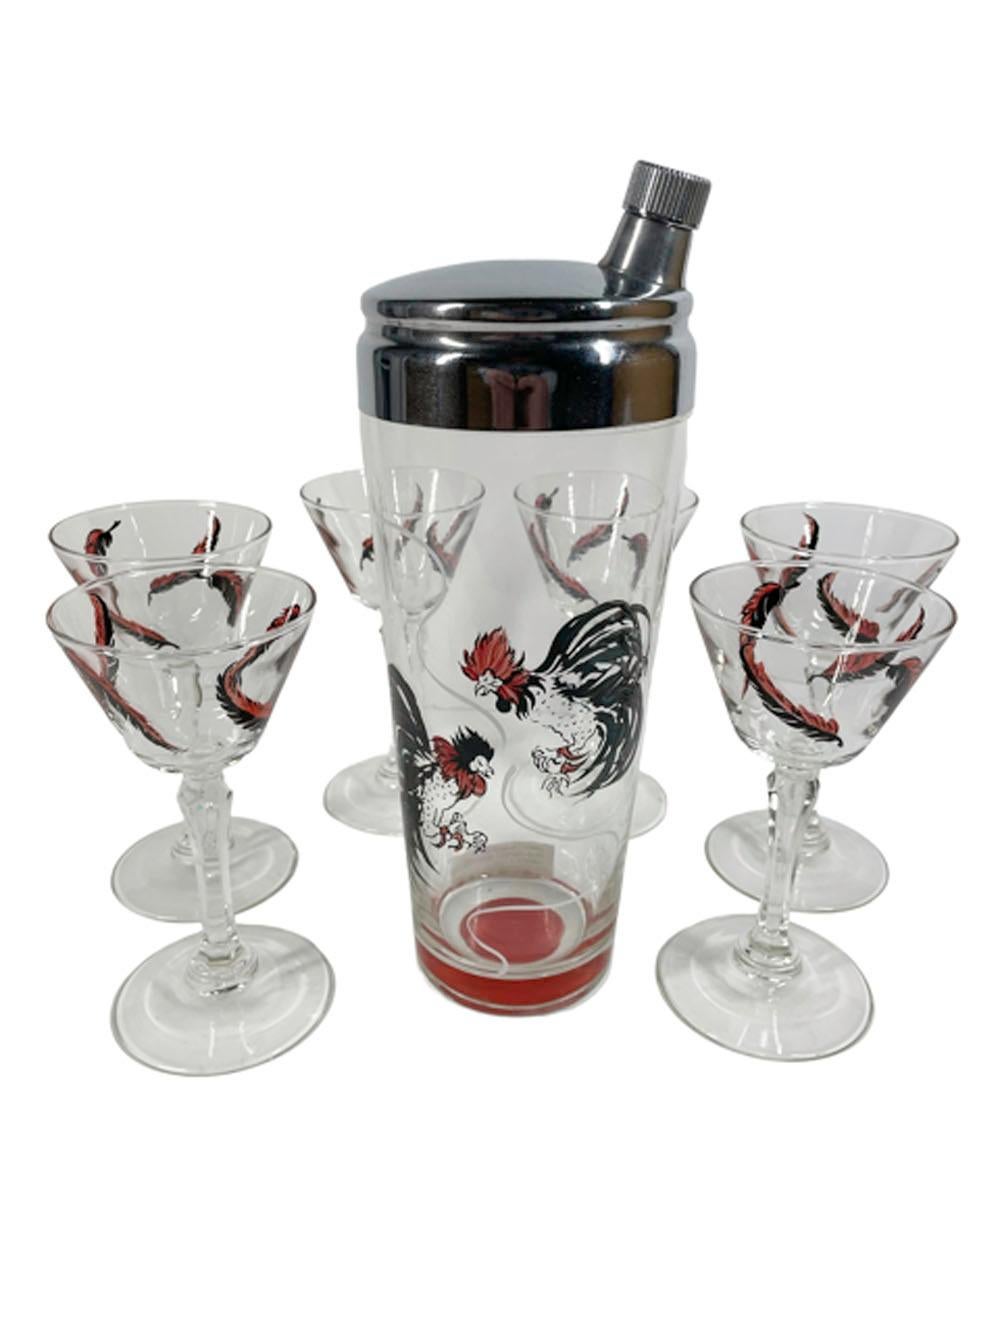 Art Deco, Hand Painted Rooster Cocktail Shaker & 6 Stemmed Glasses For Sale 2